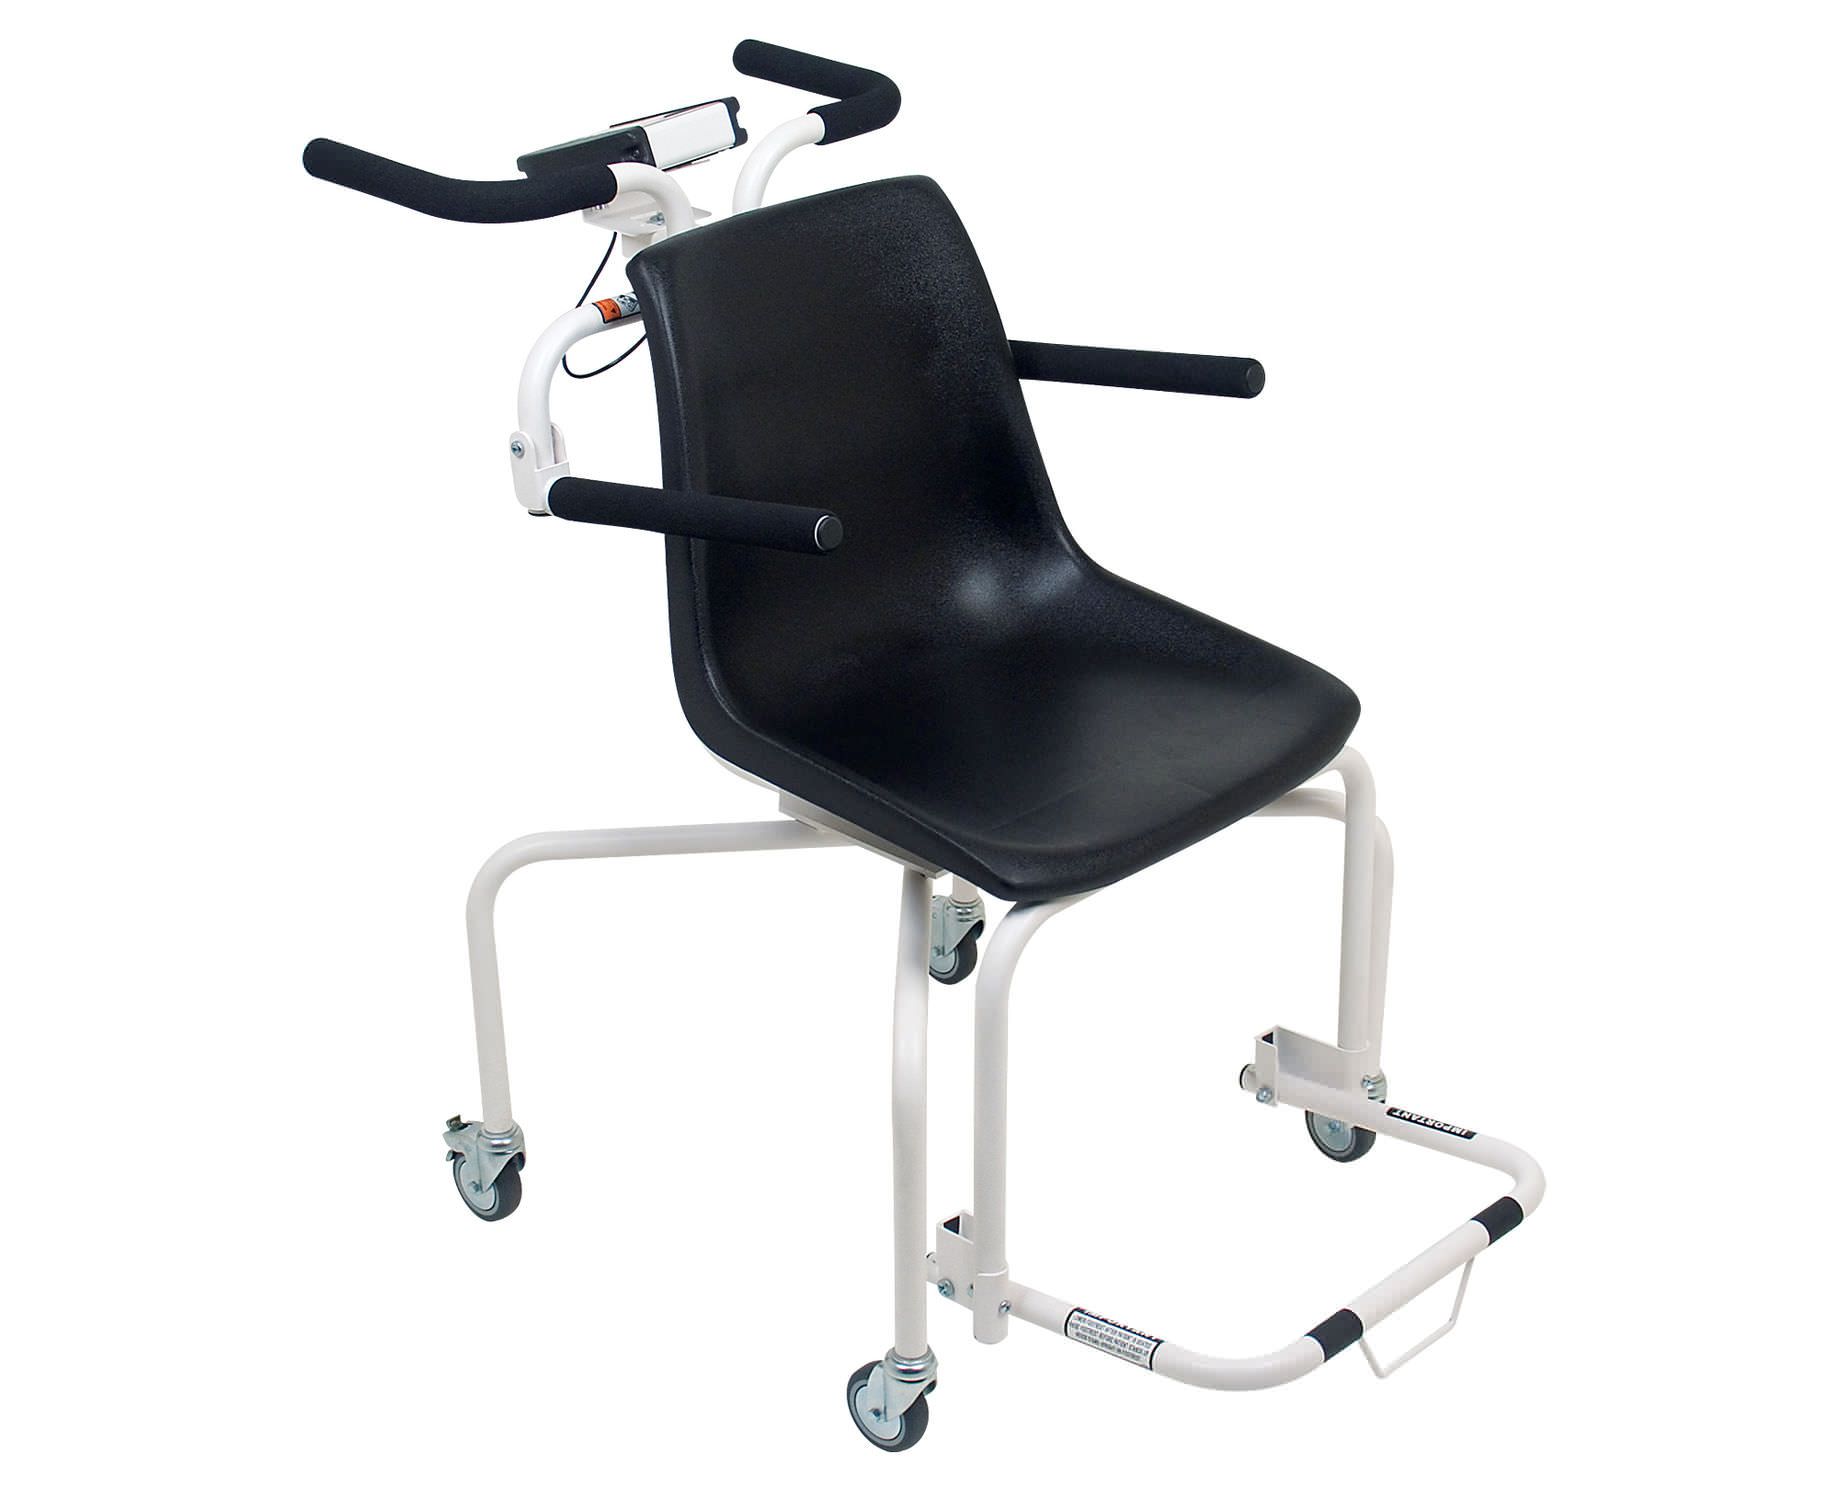 Electronic patient weighing scale / chair 200 kg | 6880 Detecto Scale